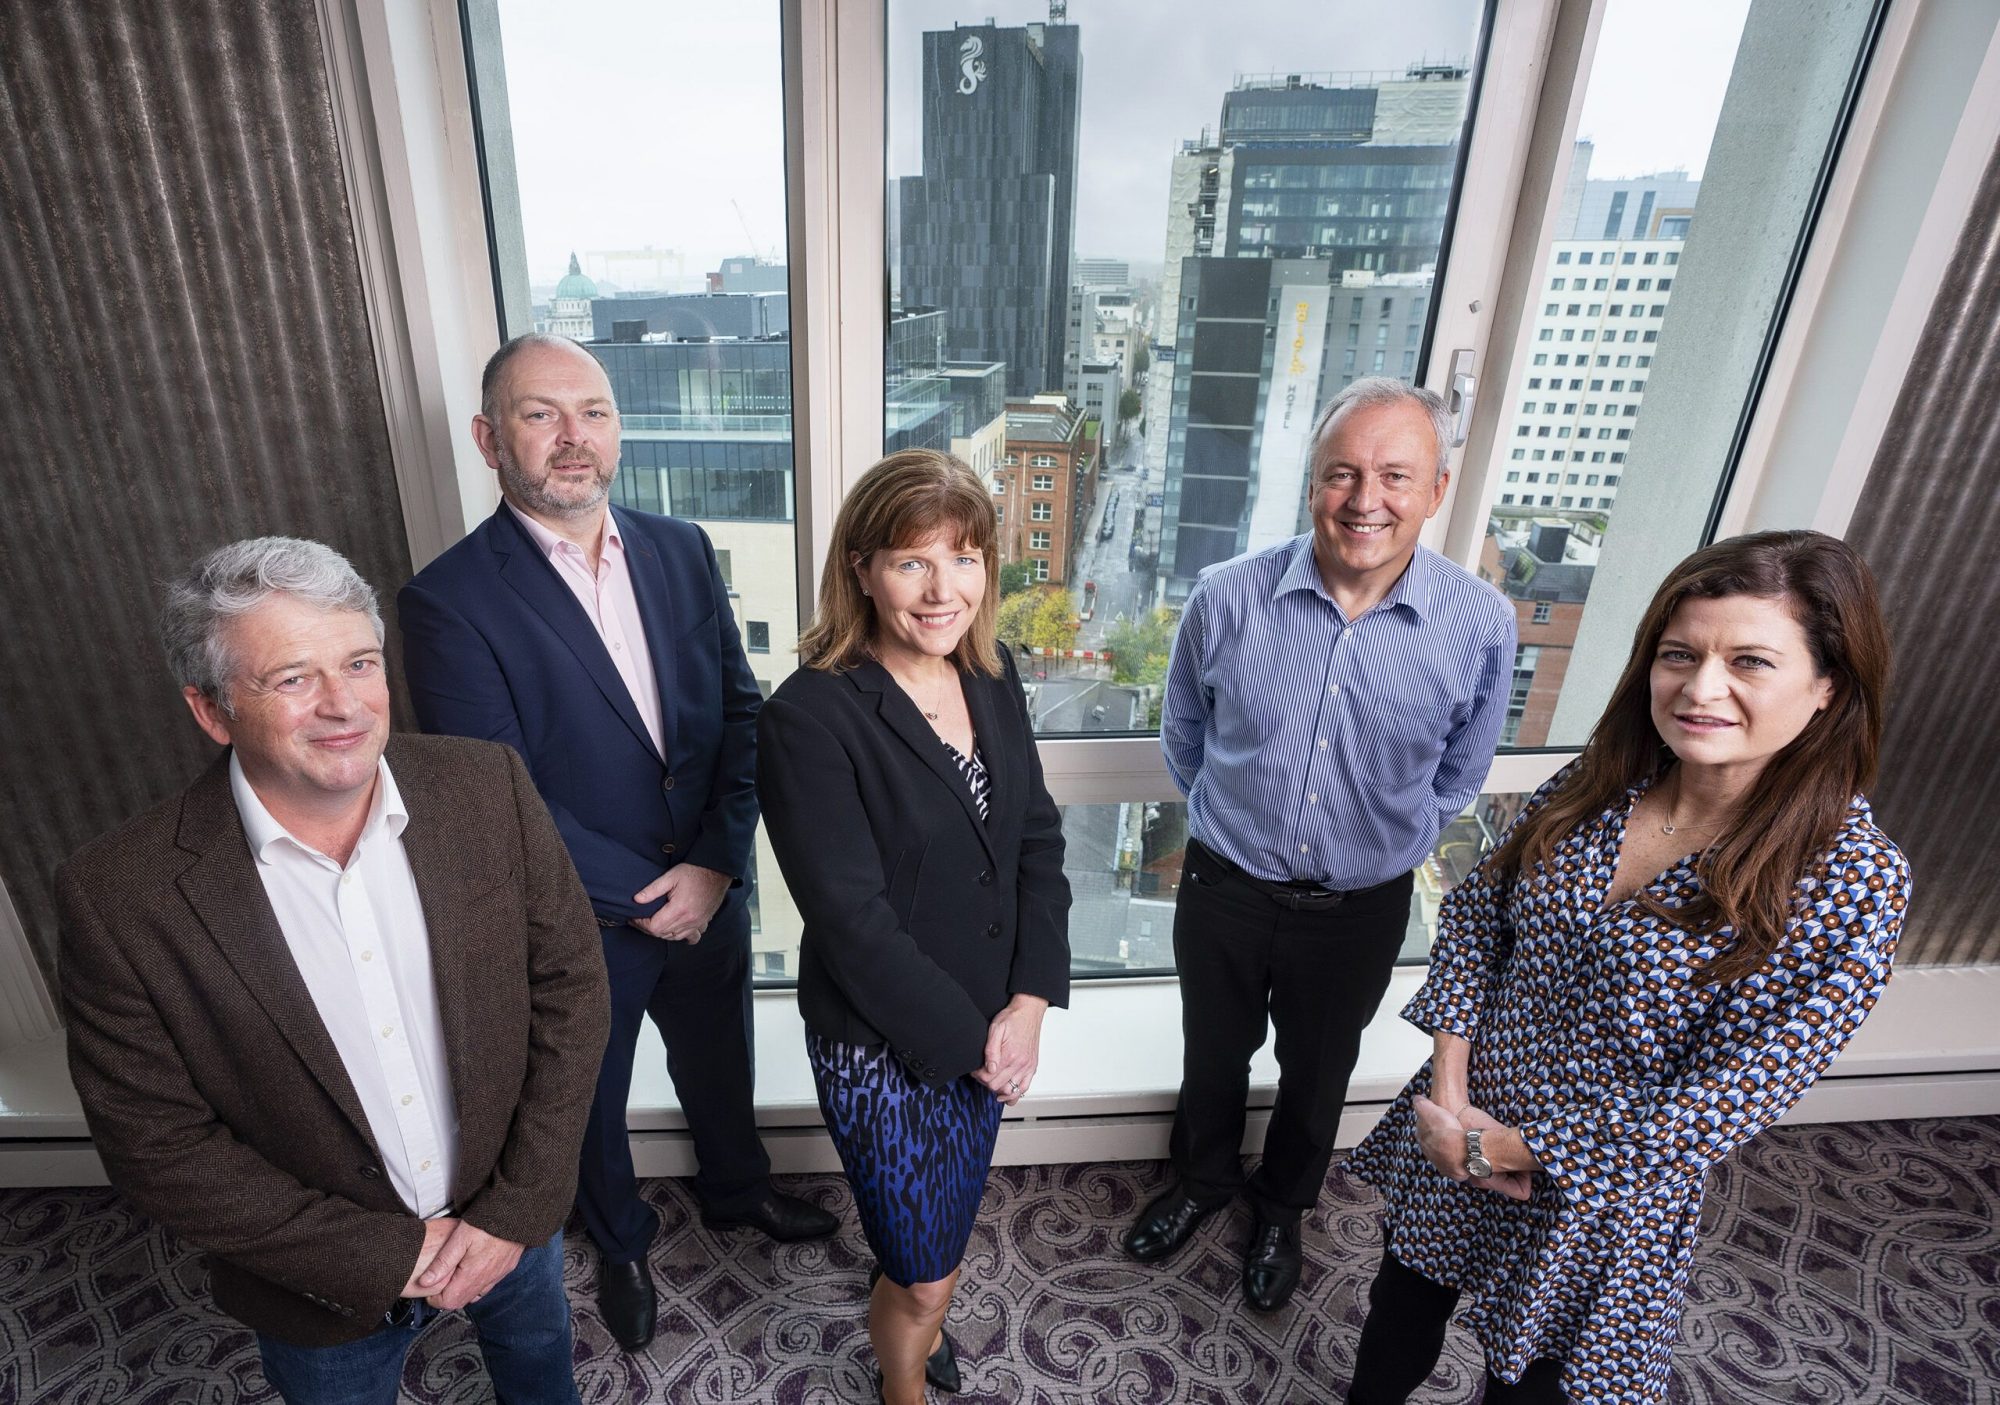 VC INVESTORS FROM ACROSS THE UK IN BELFAST TO SEEK DEALS WITH NI FIRMS